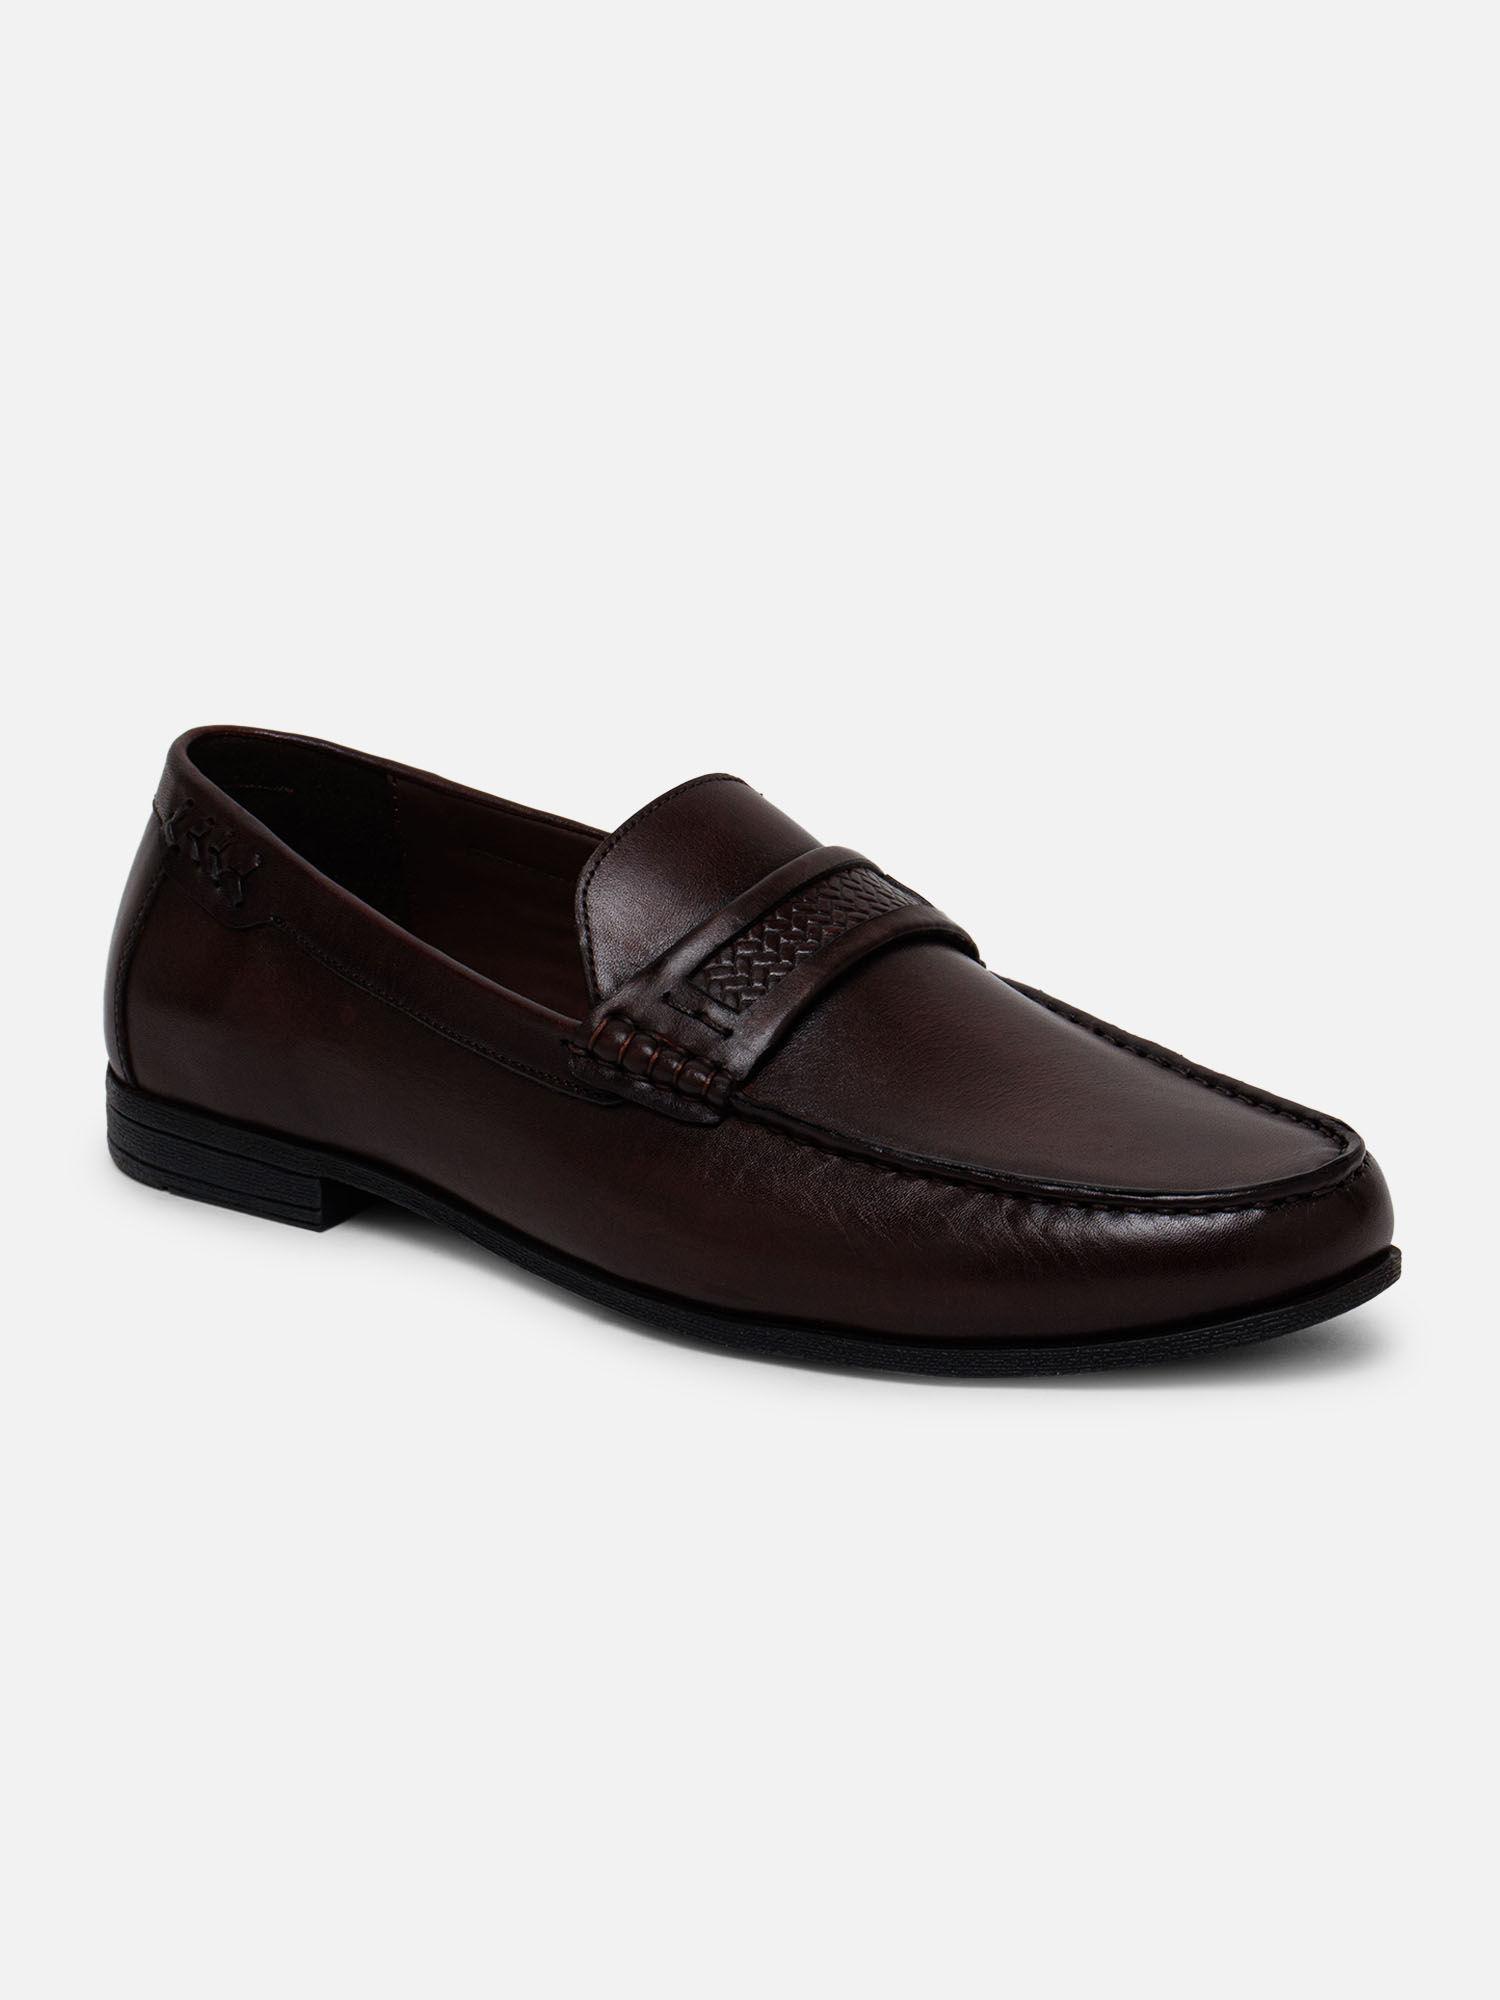 mens casual slip on casual loafers brown